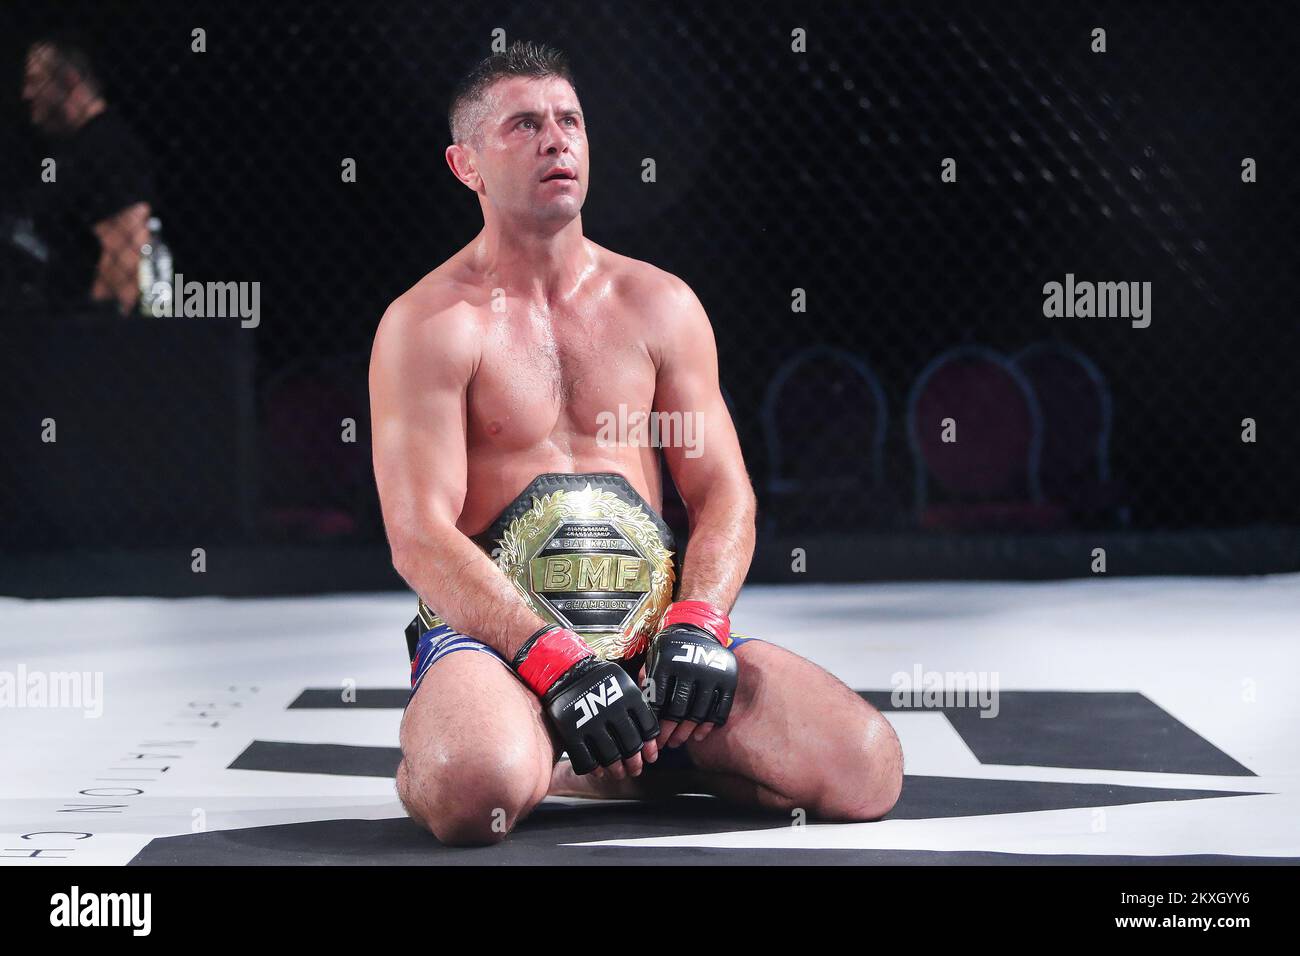 Ivica Truscek celebrated against Vaso Bakocevic (75kg) and win Balkan Championship title during the FNC 3 Fight Night event inside American Top Team Gym on July 31, 2020 in Zagreb, Croatia